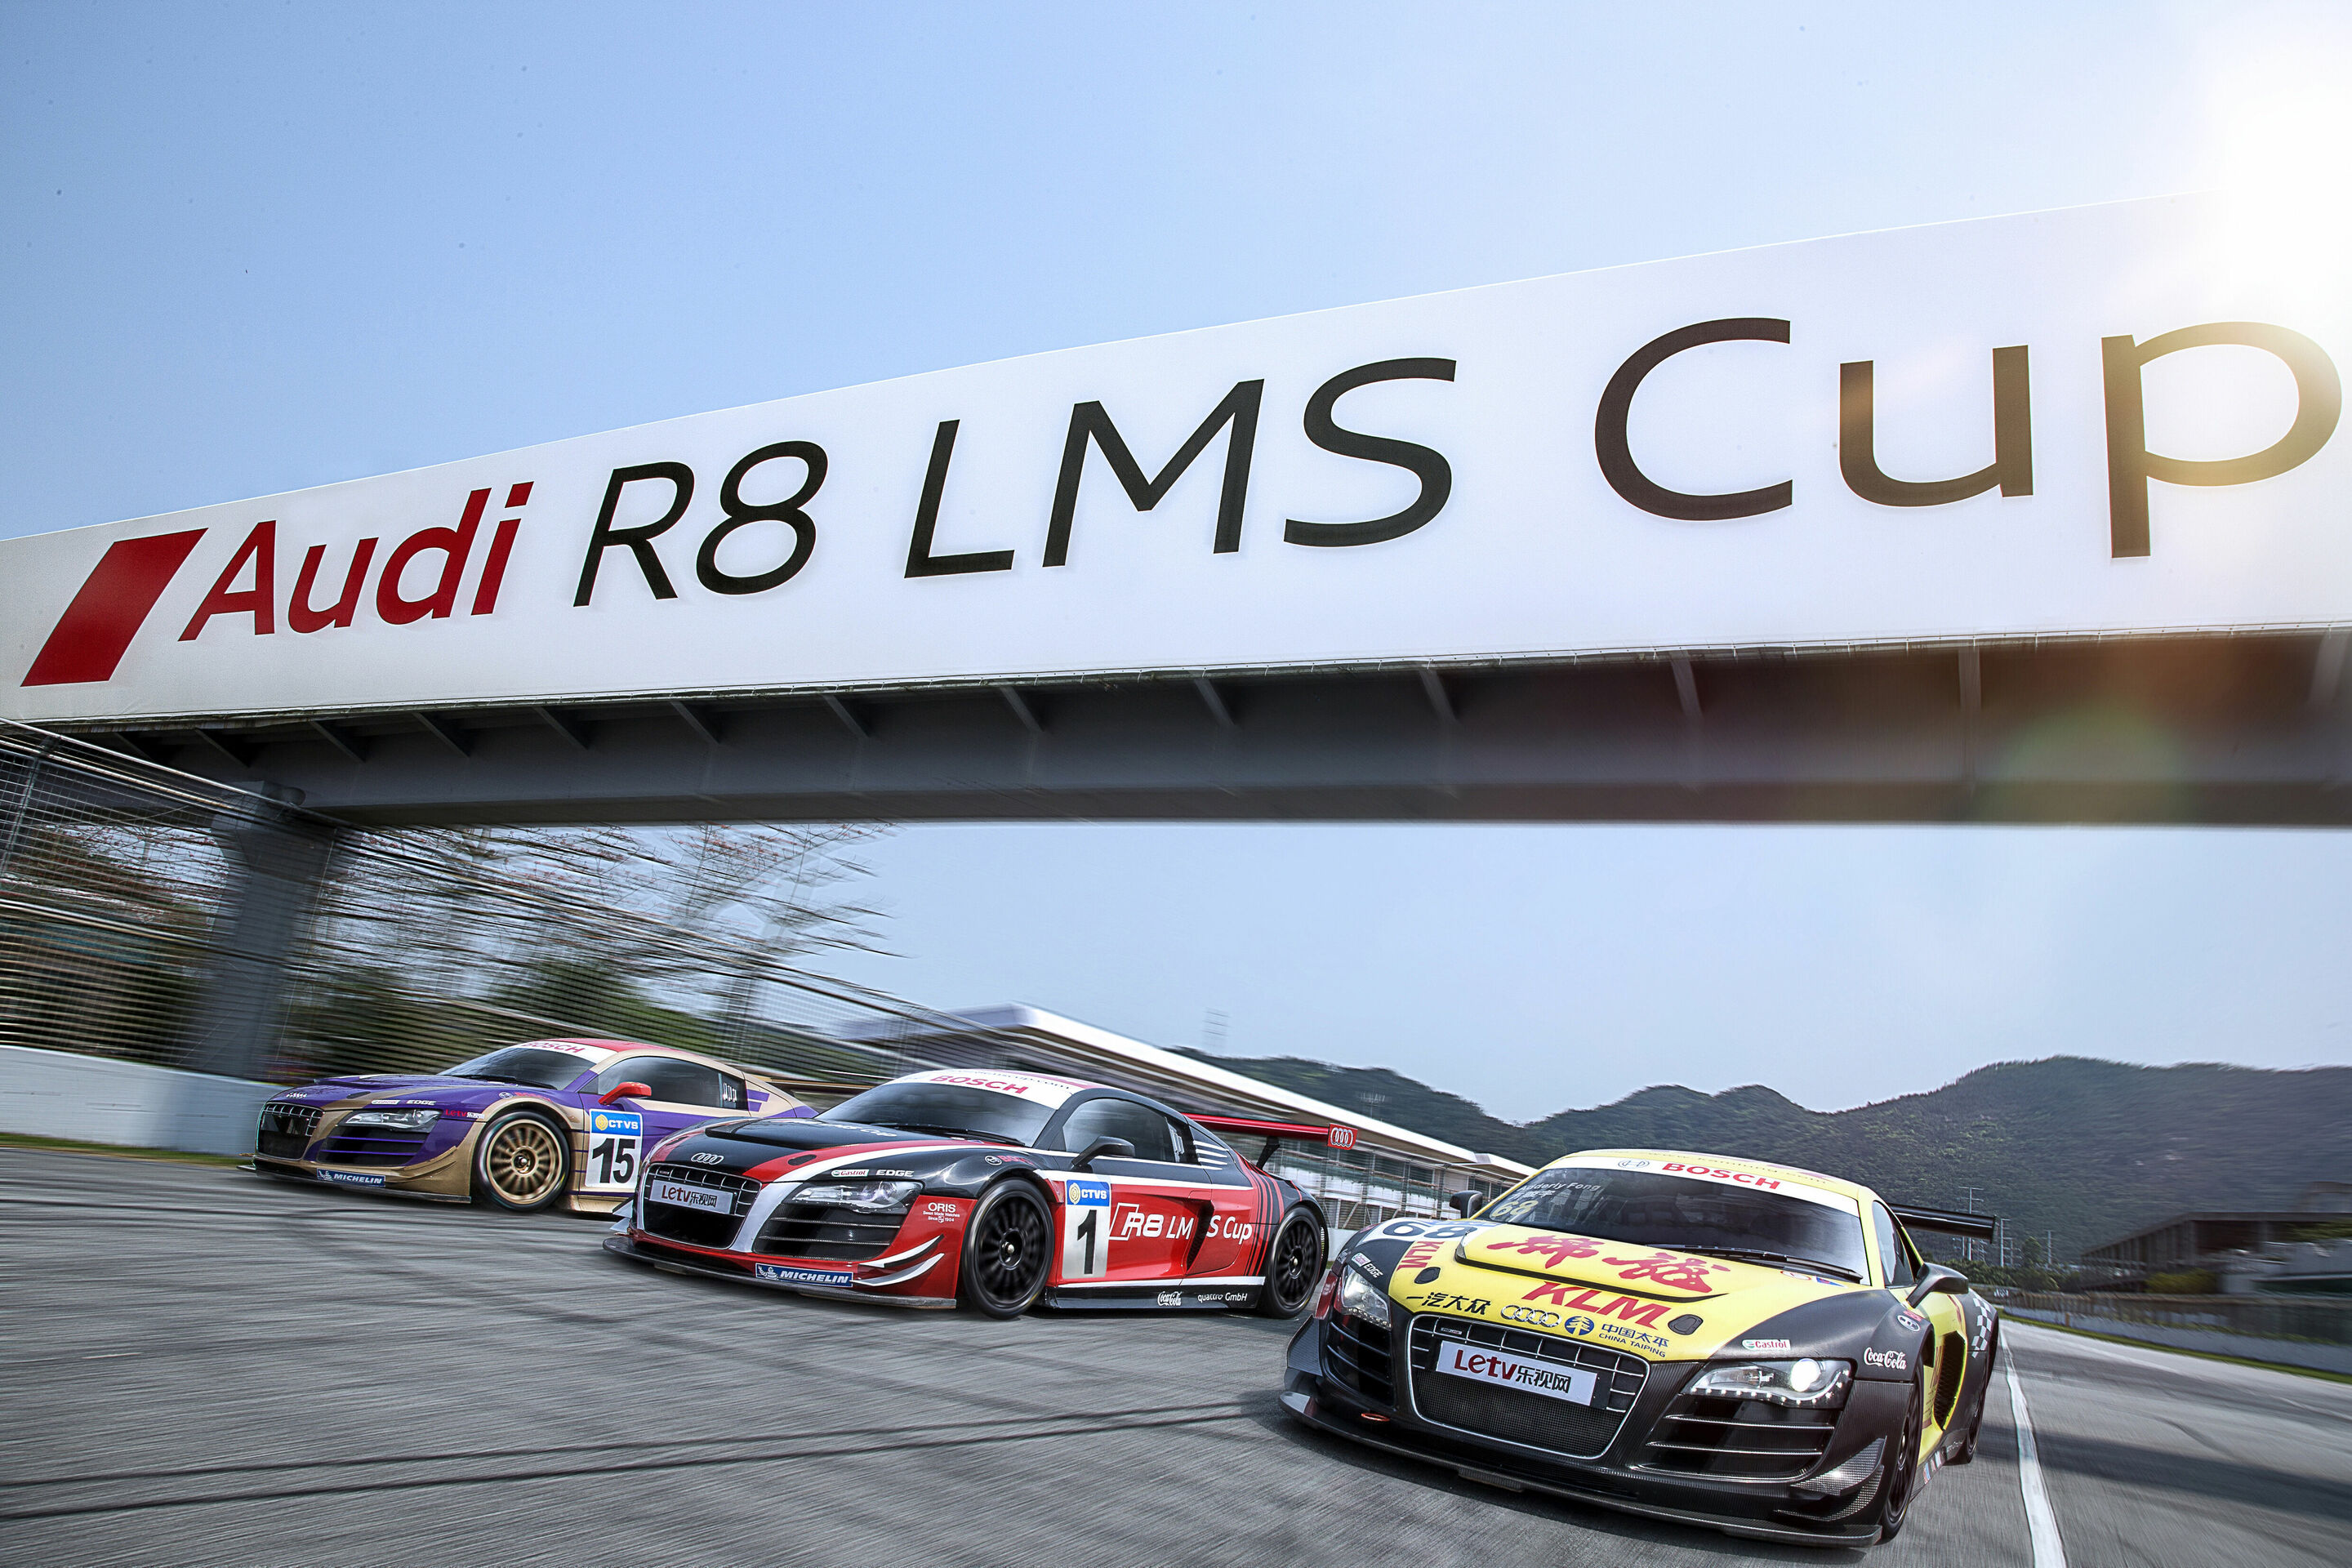 2014 Audi R8 LMS Cup boasts strong field